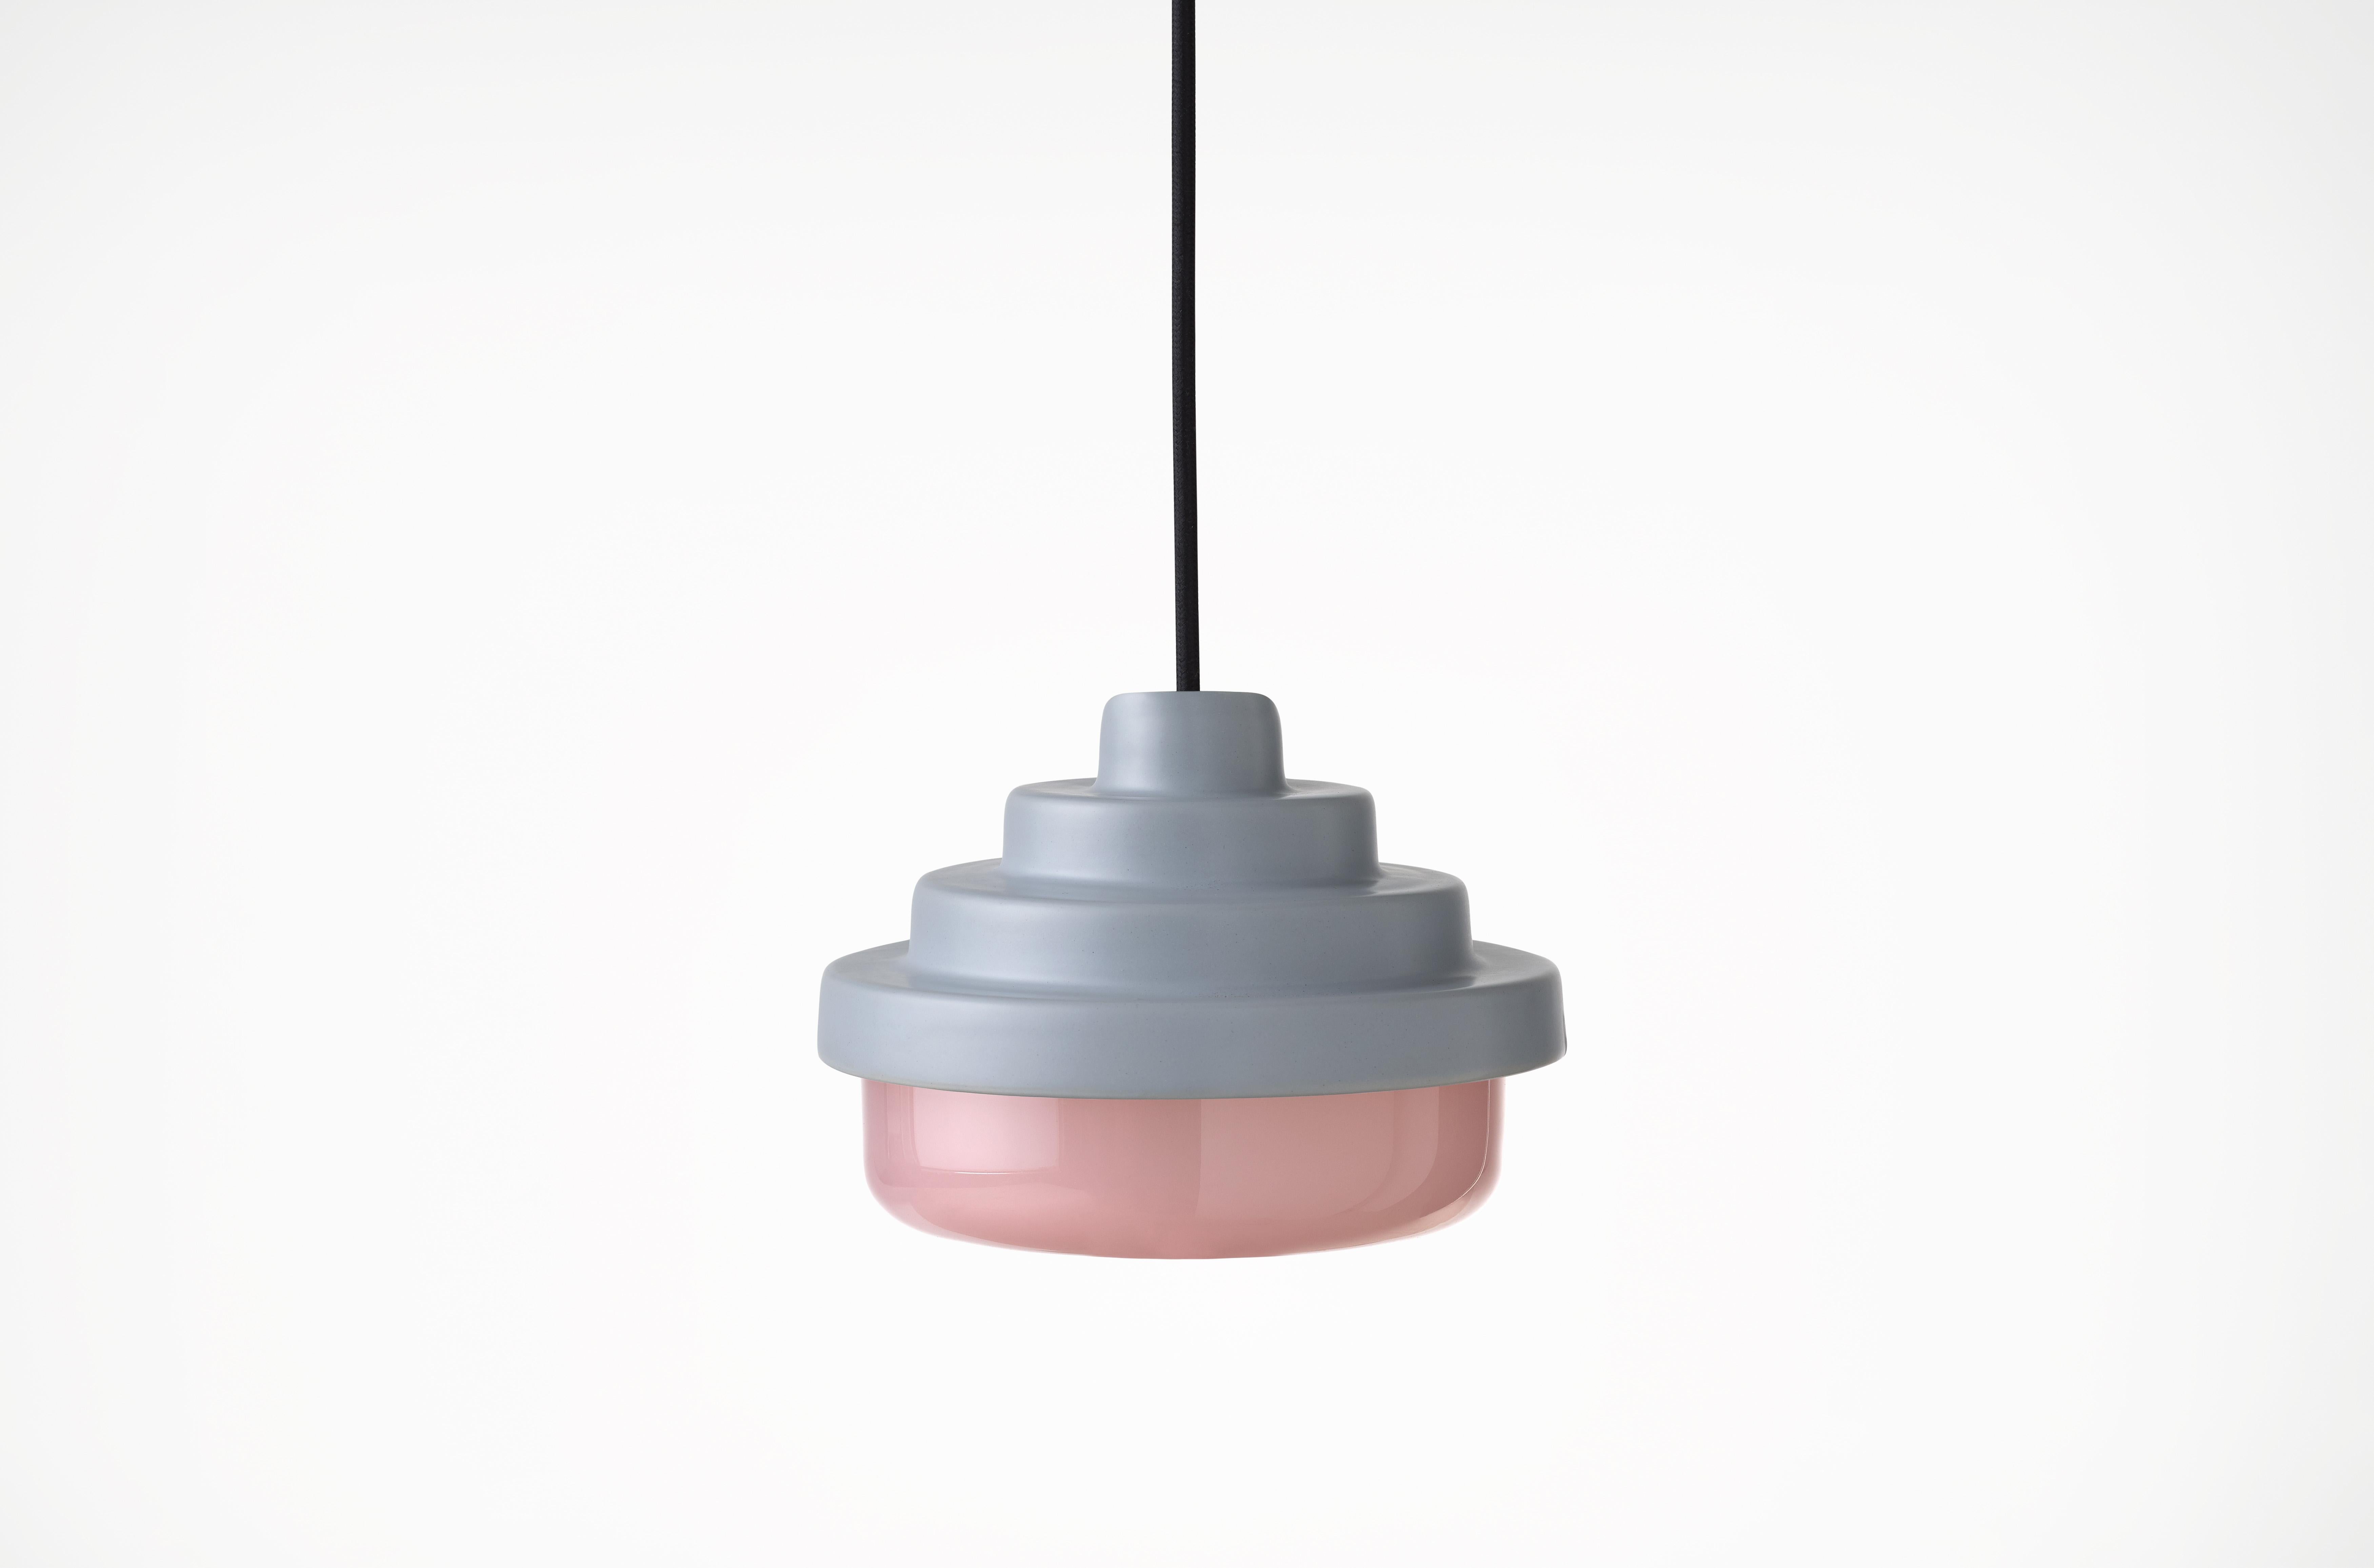 Blue and Pink Honey Pendant Light by Coco Flip
Dimensions: D 18 x W 18 x H 13 cm
Materials: Slip cast ceramic stoneware with blown glass. 
Weight: Approx. 2kg
Glass finishes: Pink.
Ceramic finishes: Blue satin glaze. 

Standard fixtures included
1 x